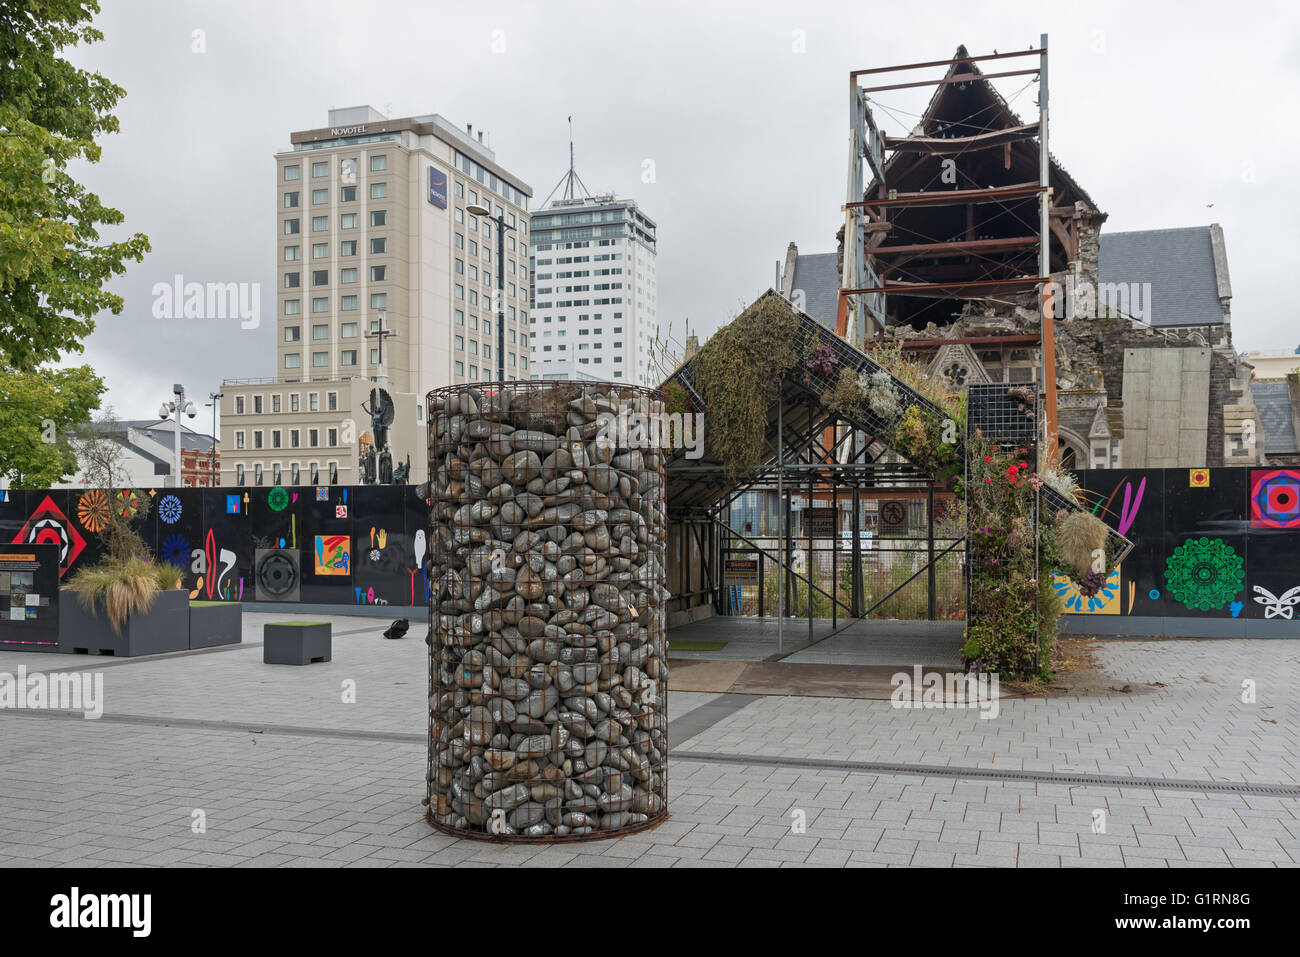 CHRISTCHURCH, NEW ZEALAND - JAN 16, 2016: Damaged Christchurch Cathedral demolished by earthquake in February 2010 Stock Photo